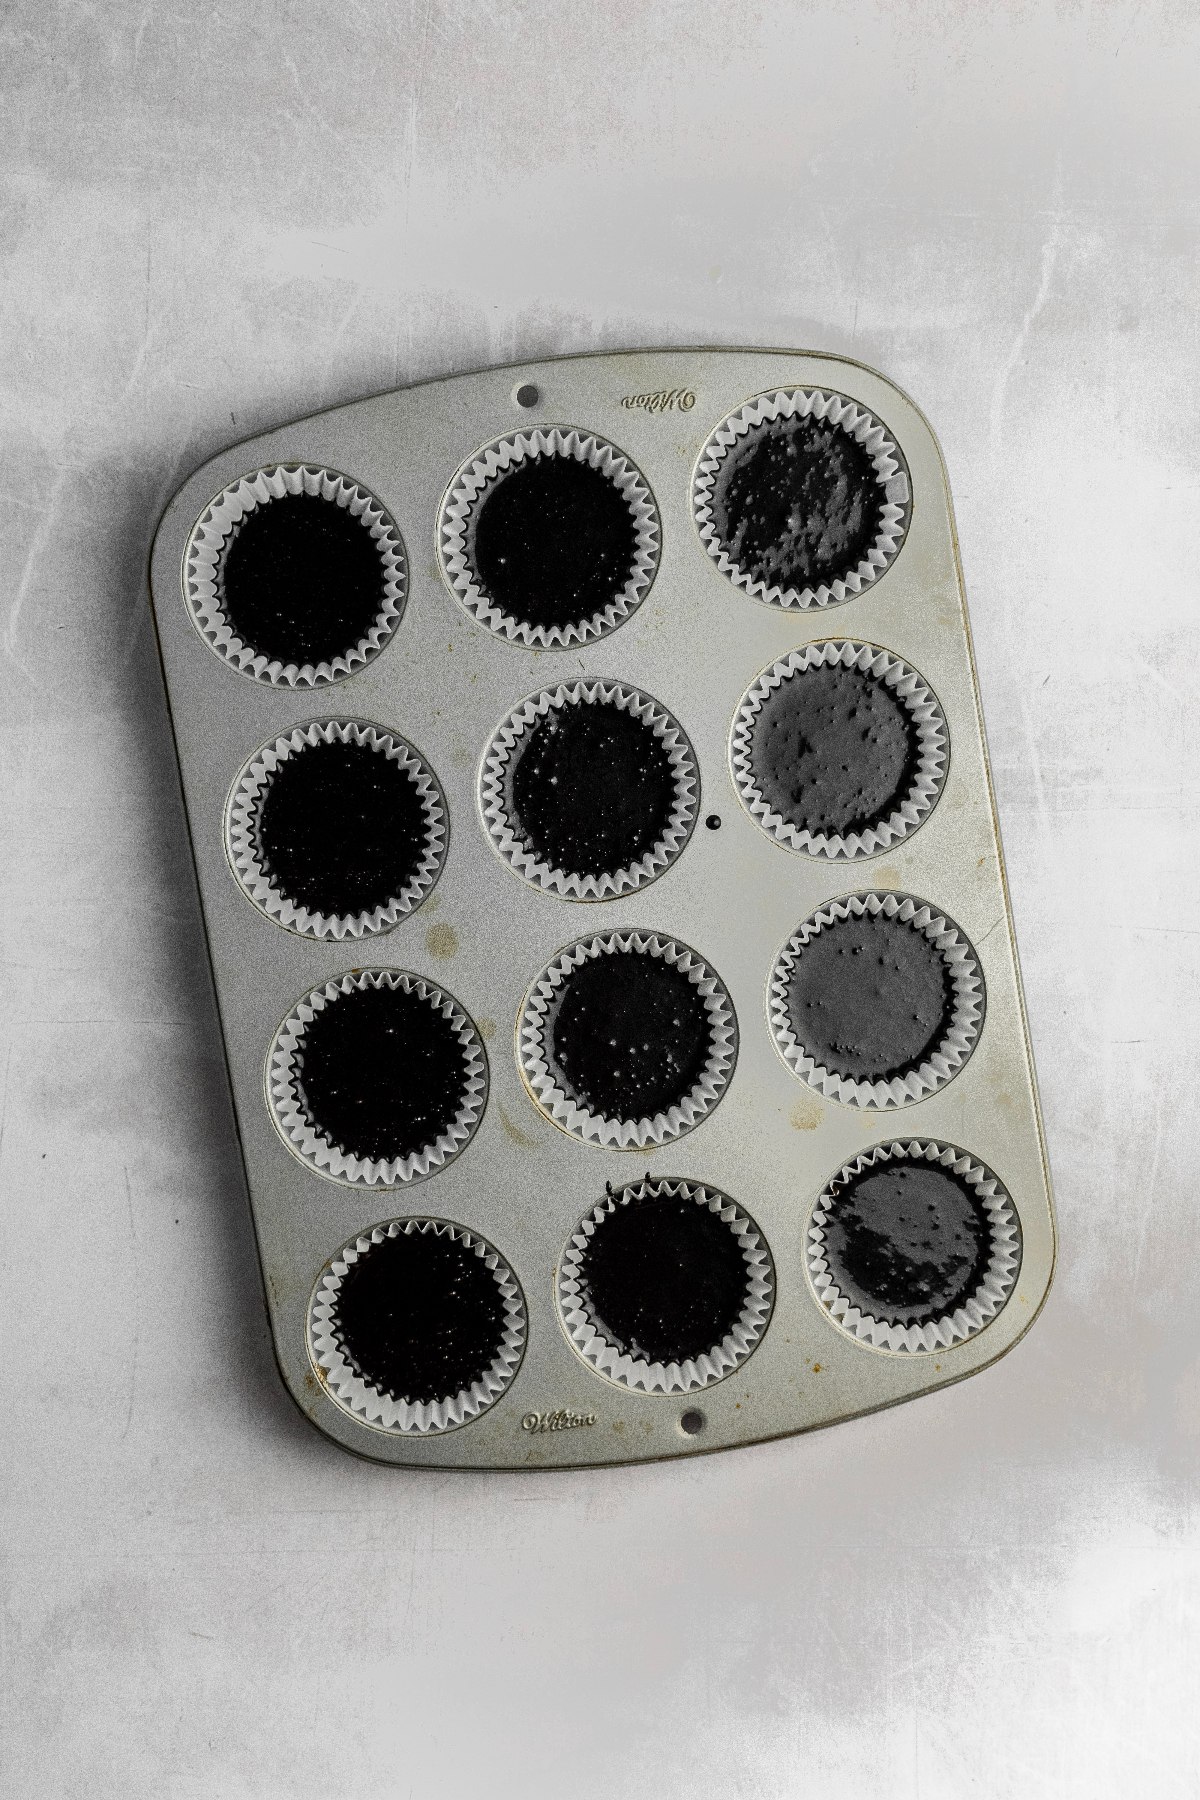 Muffin pan filled with cupcake batter.